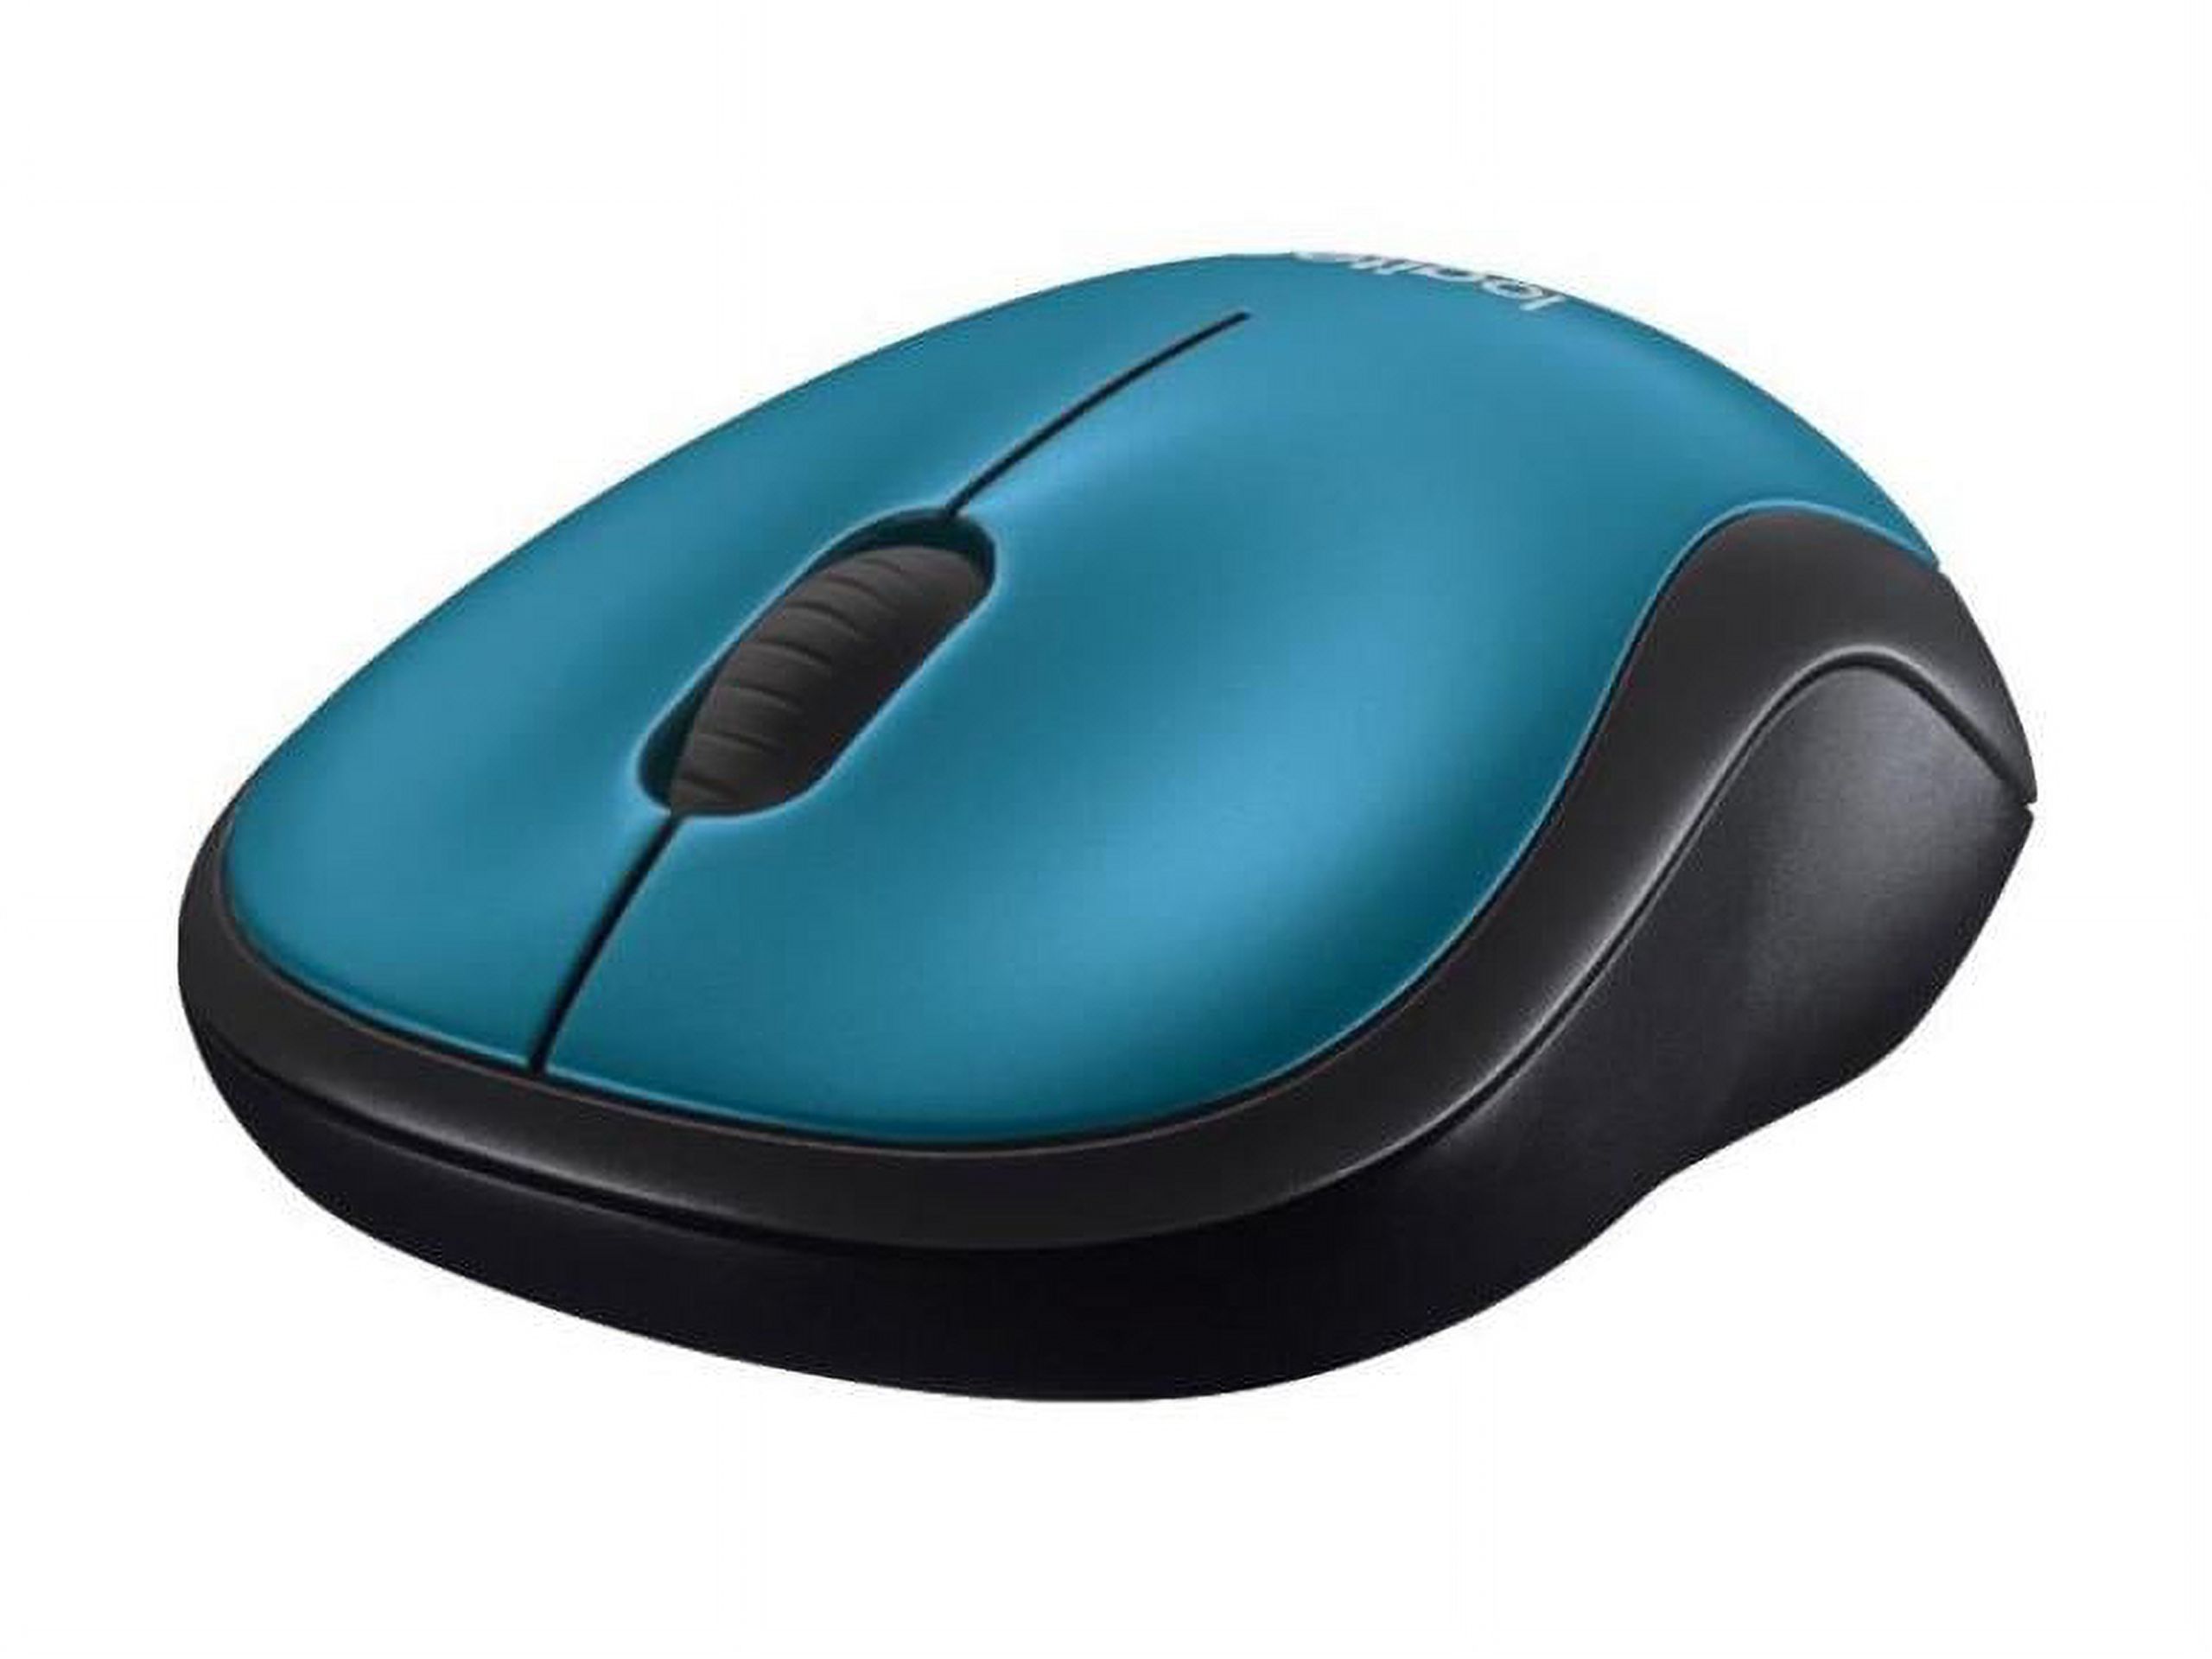 Logitech M185 Wireless Mouse, 2.4GHz with USB Mini Receiver, Ambidextrous, Blue - image 2 of 15